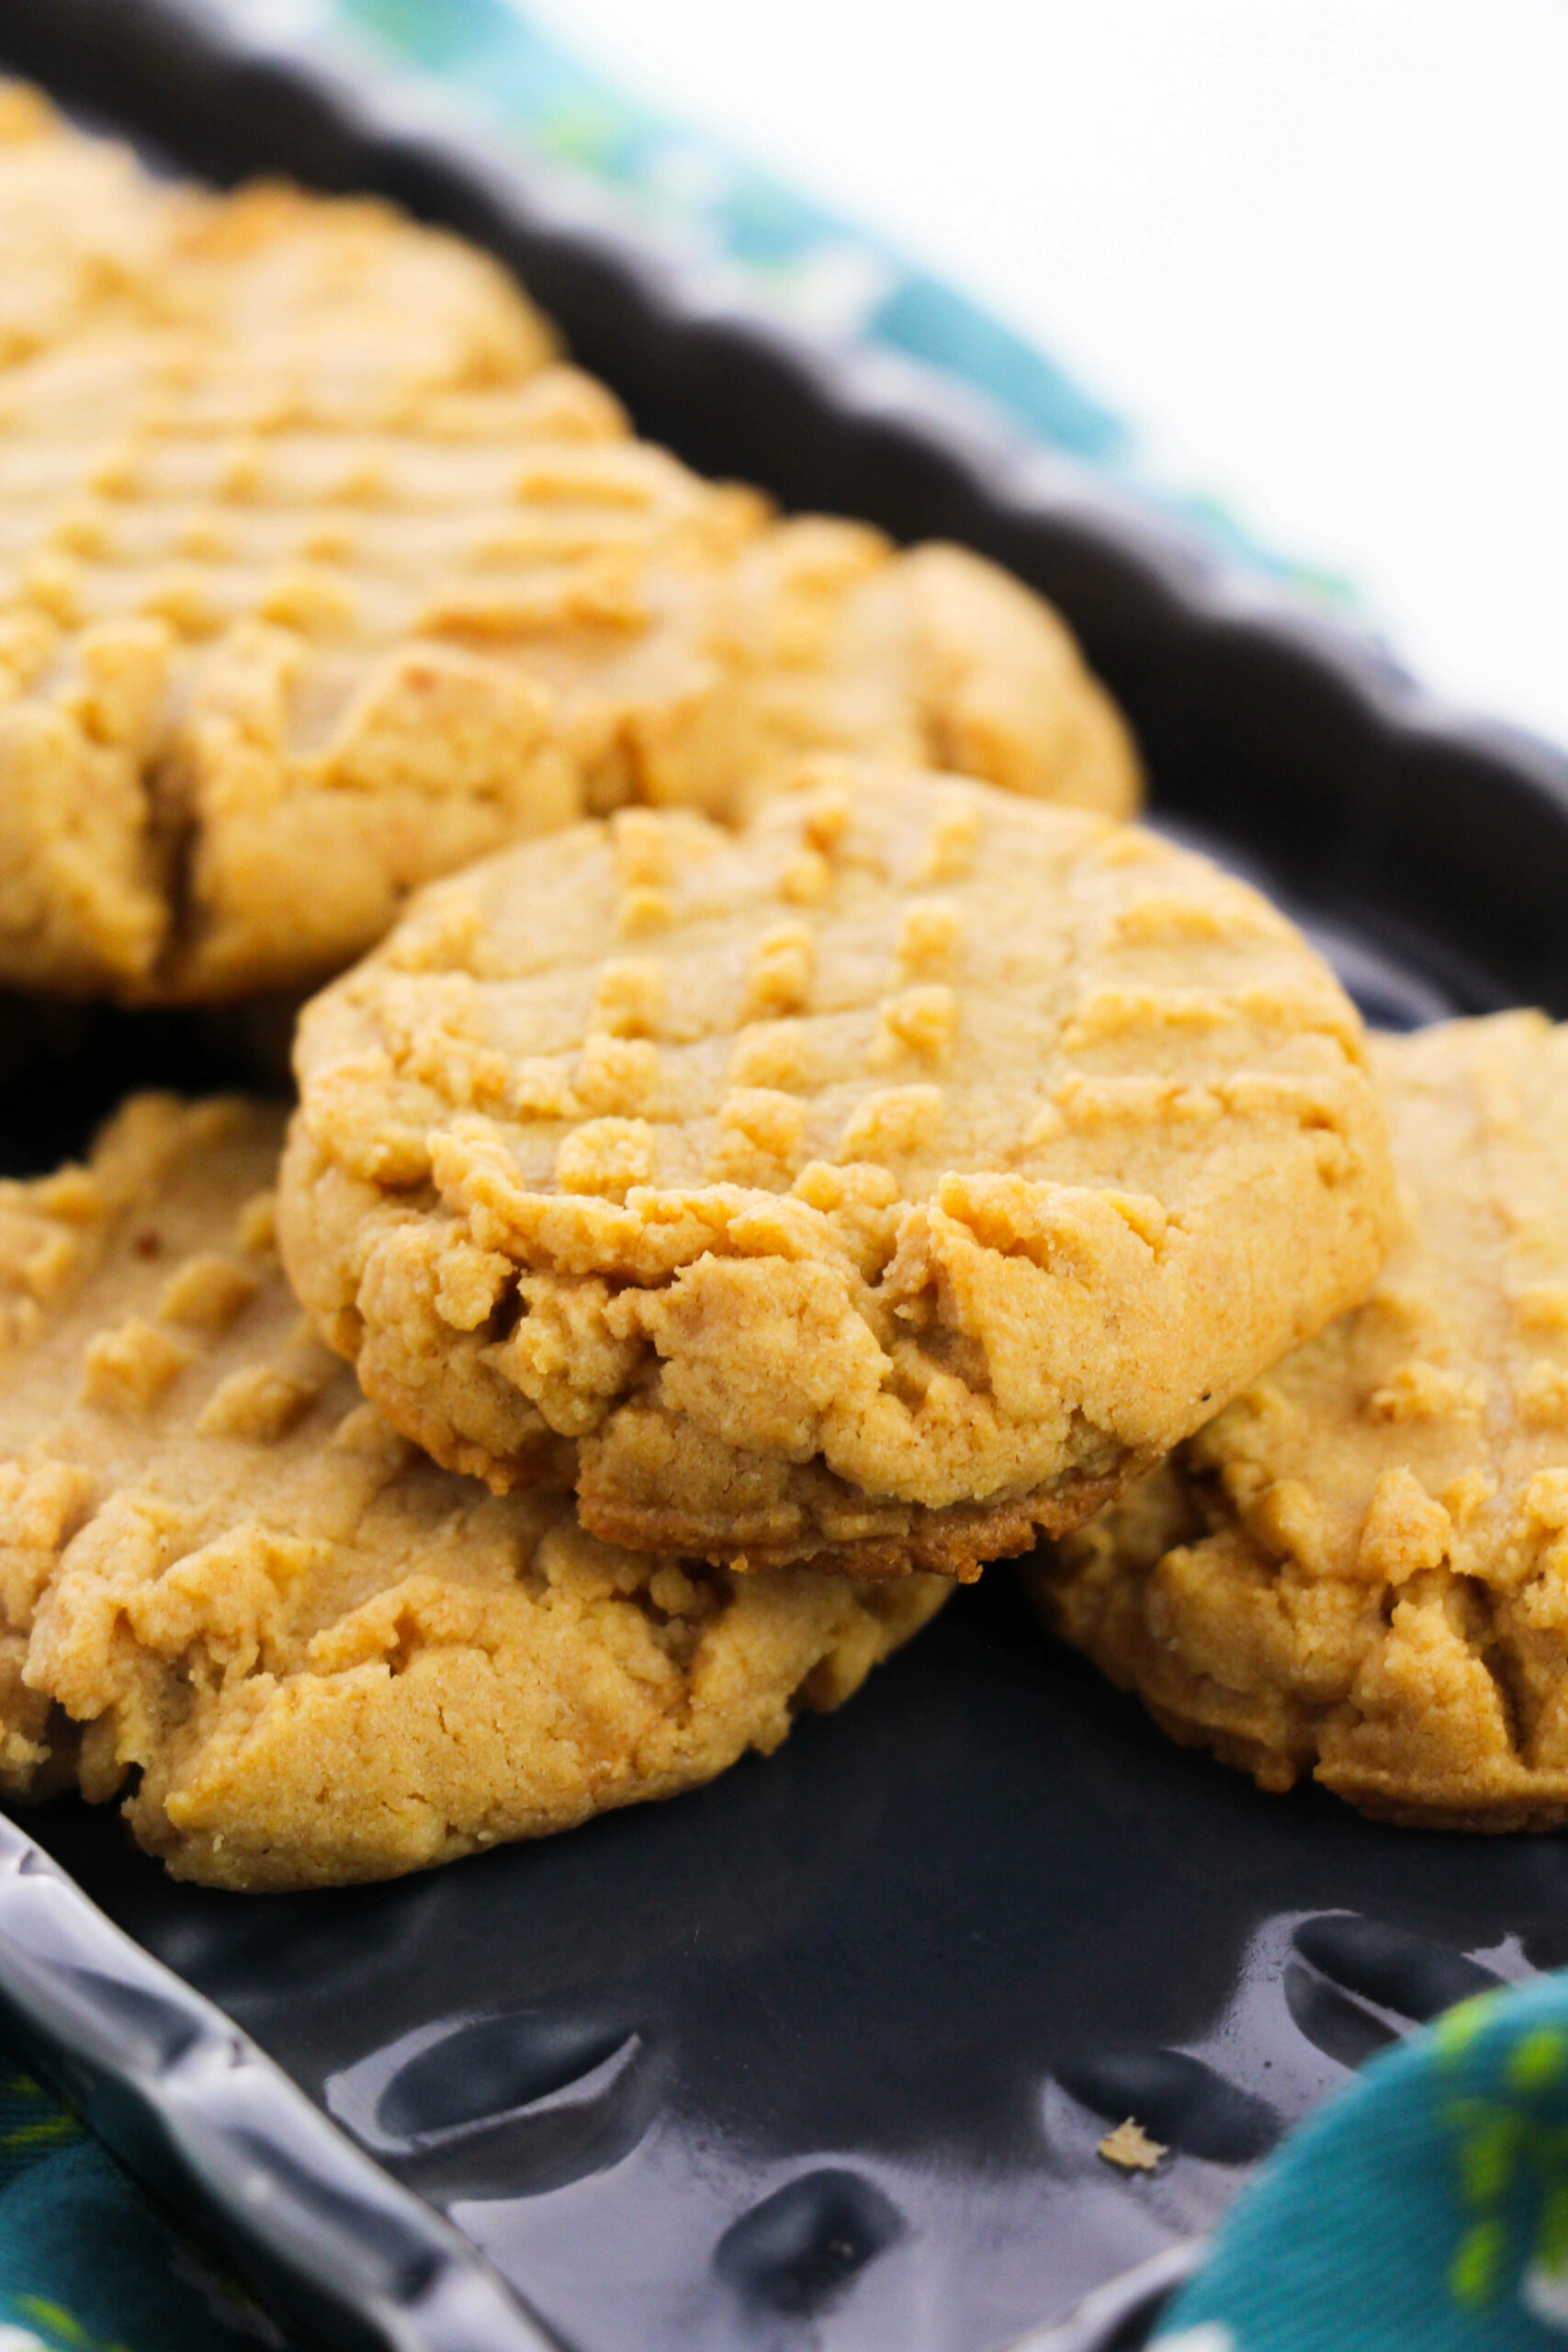 A closeup on the jif peanut butter cookies.